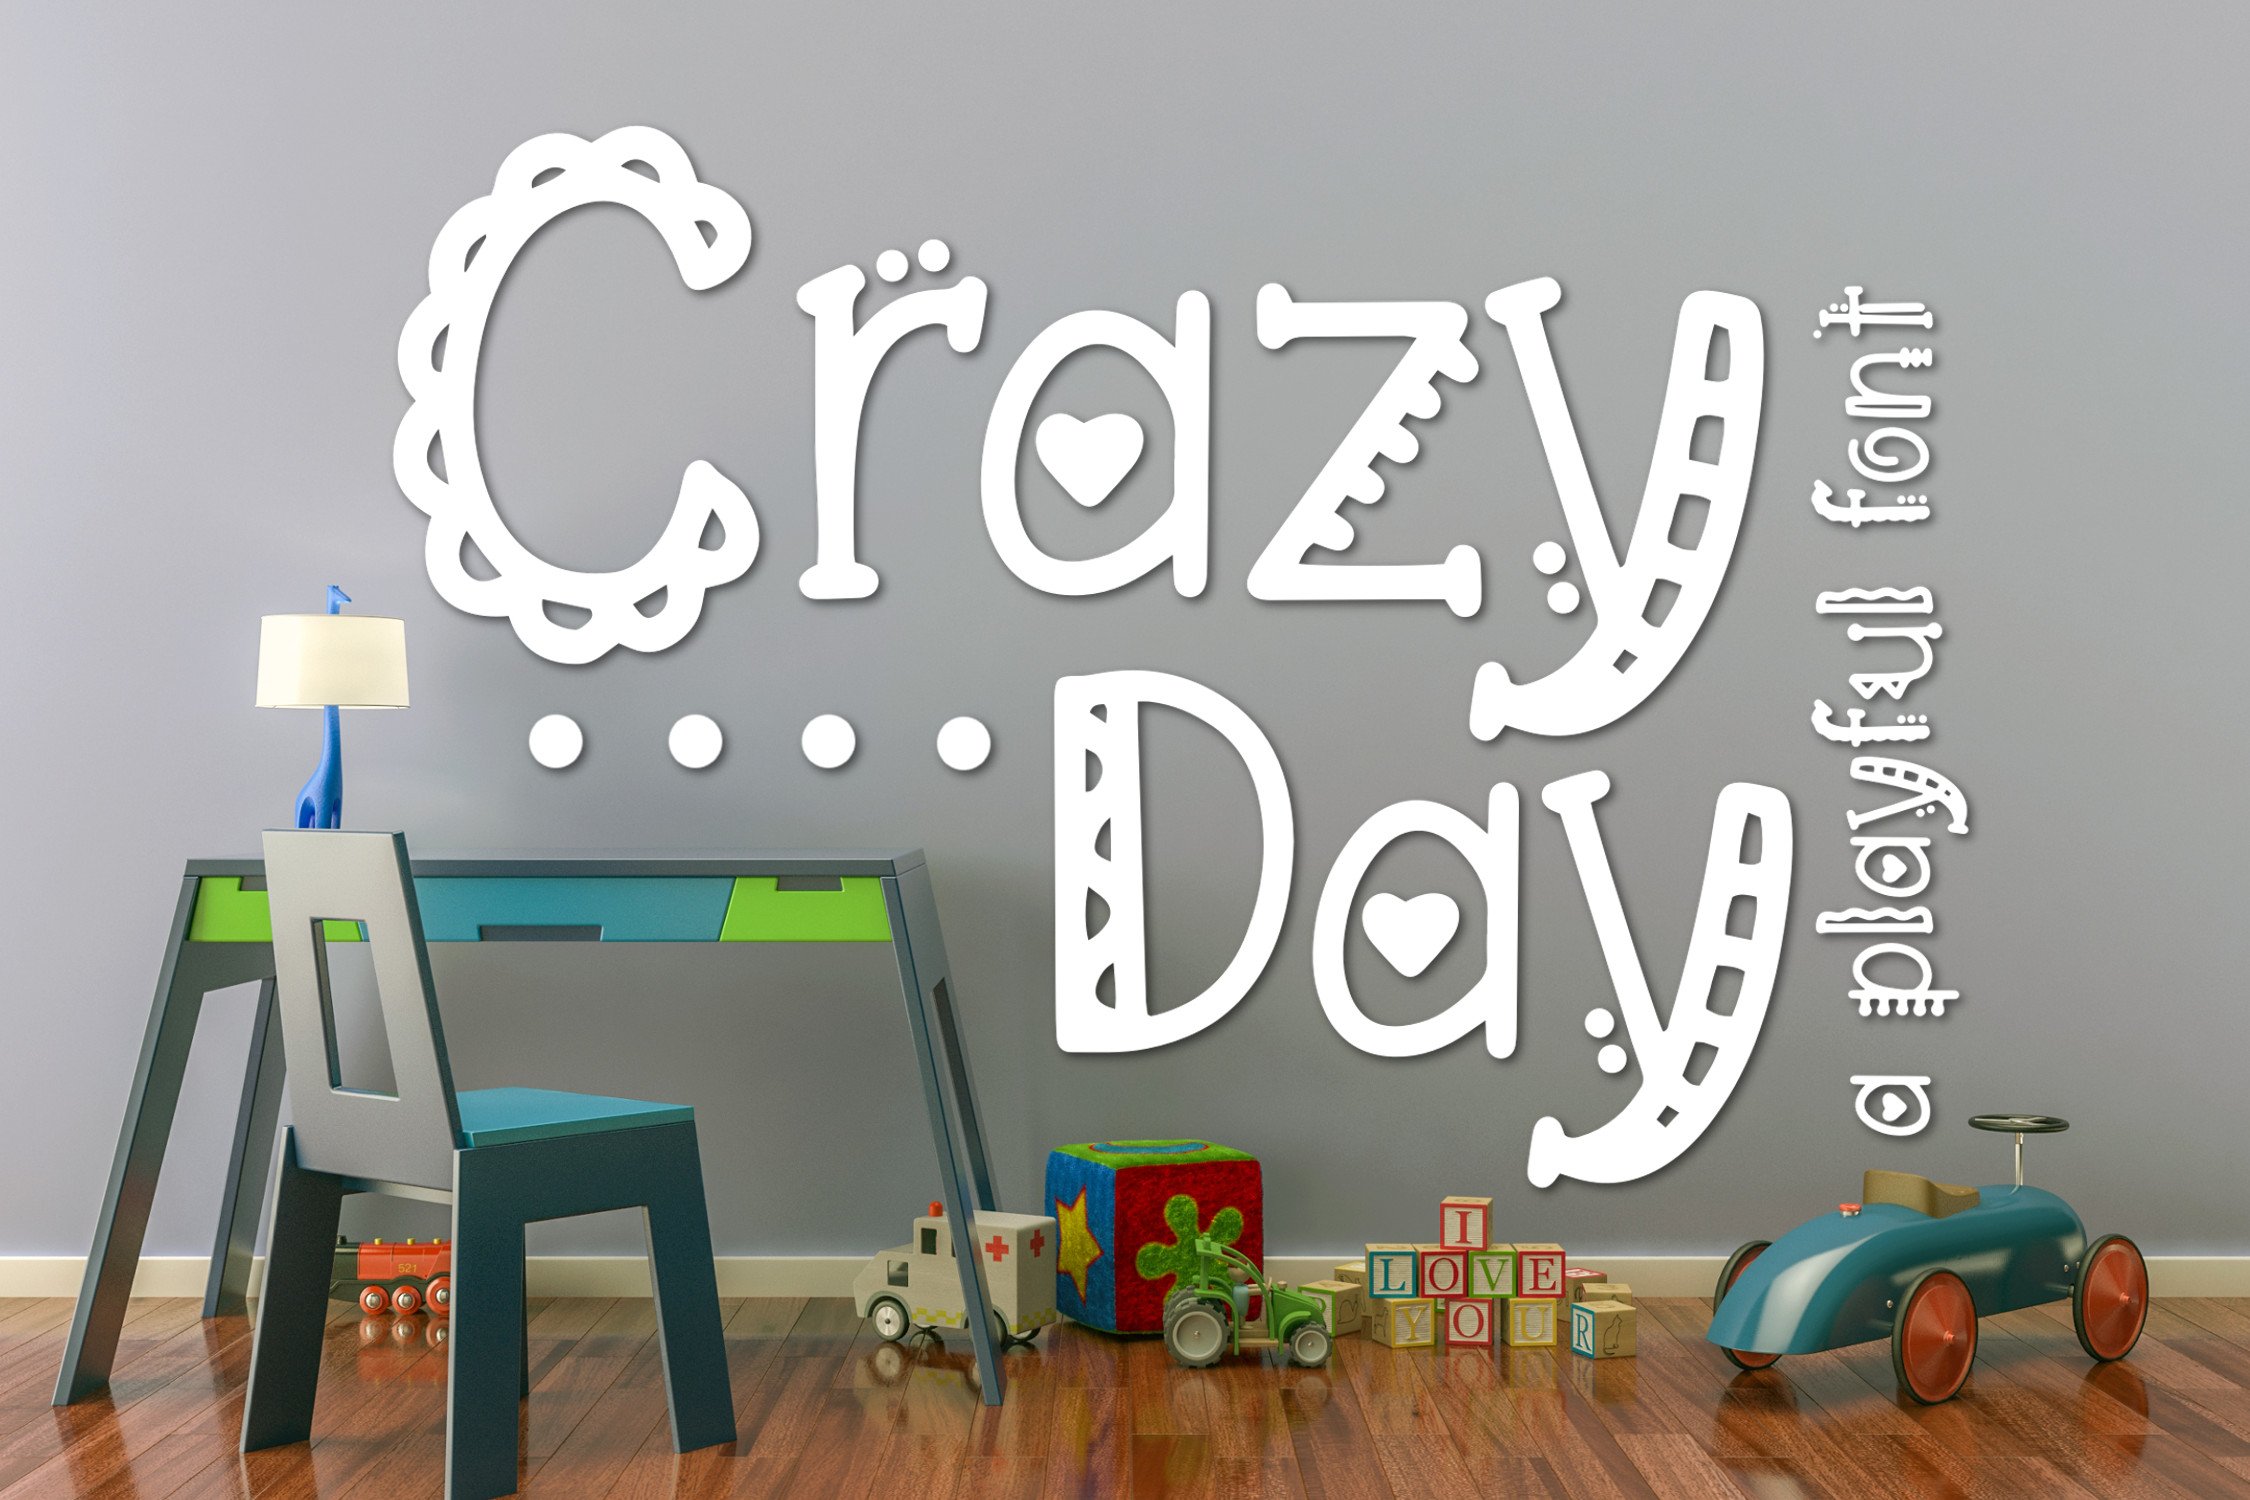 Crazy Day a Playful Font cover image.